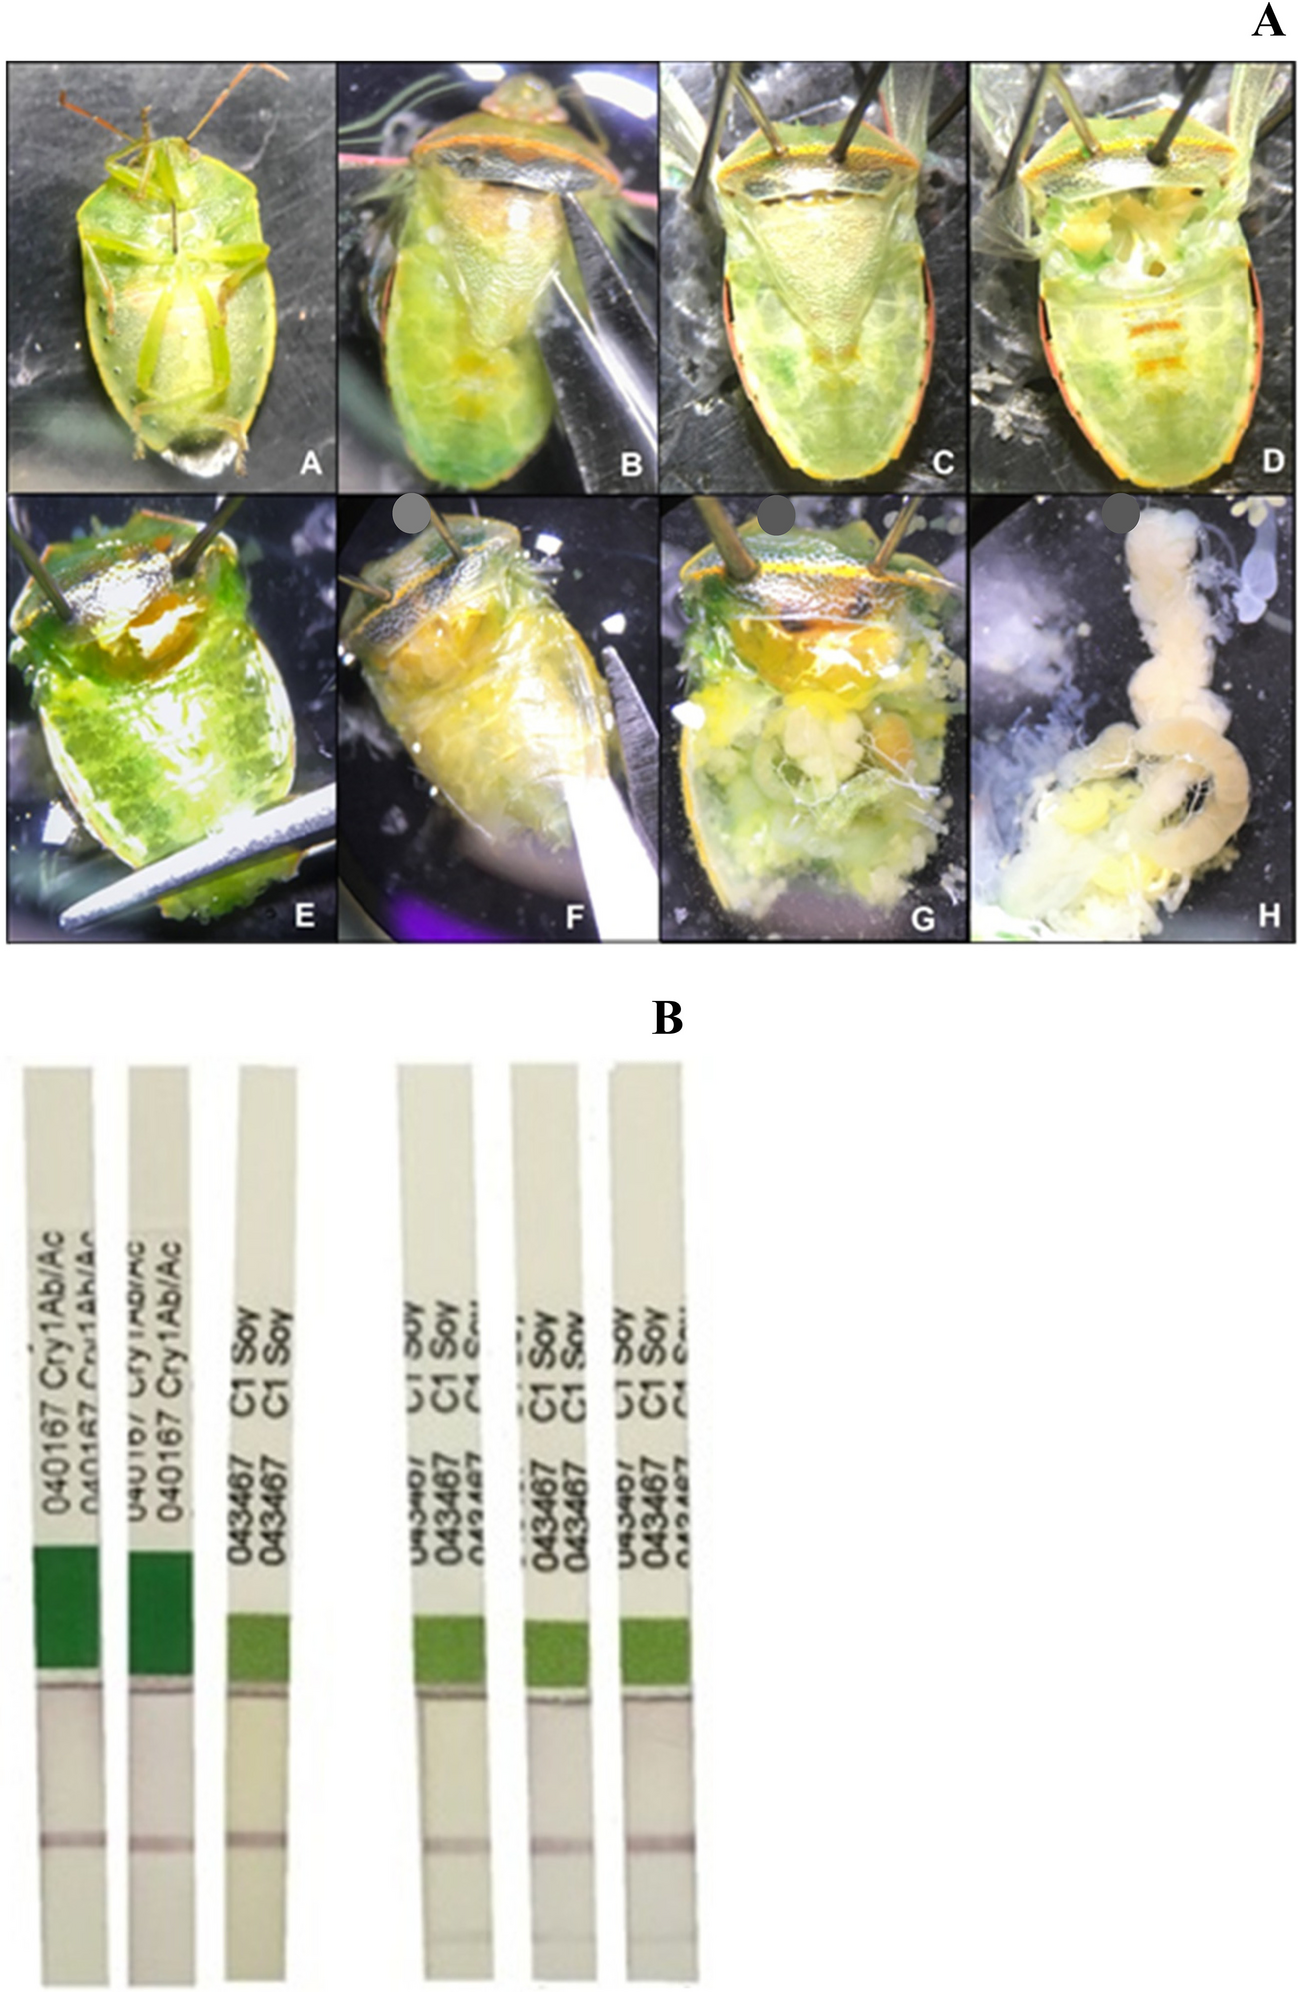 Bt Soybean Cry1Ac Does Not Affect Development, Reproduction, or Feeding Behavior of Red-Banded Stink Bug Piezodorus guildinii (Hemiptera: Pentatomidae)